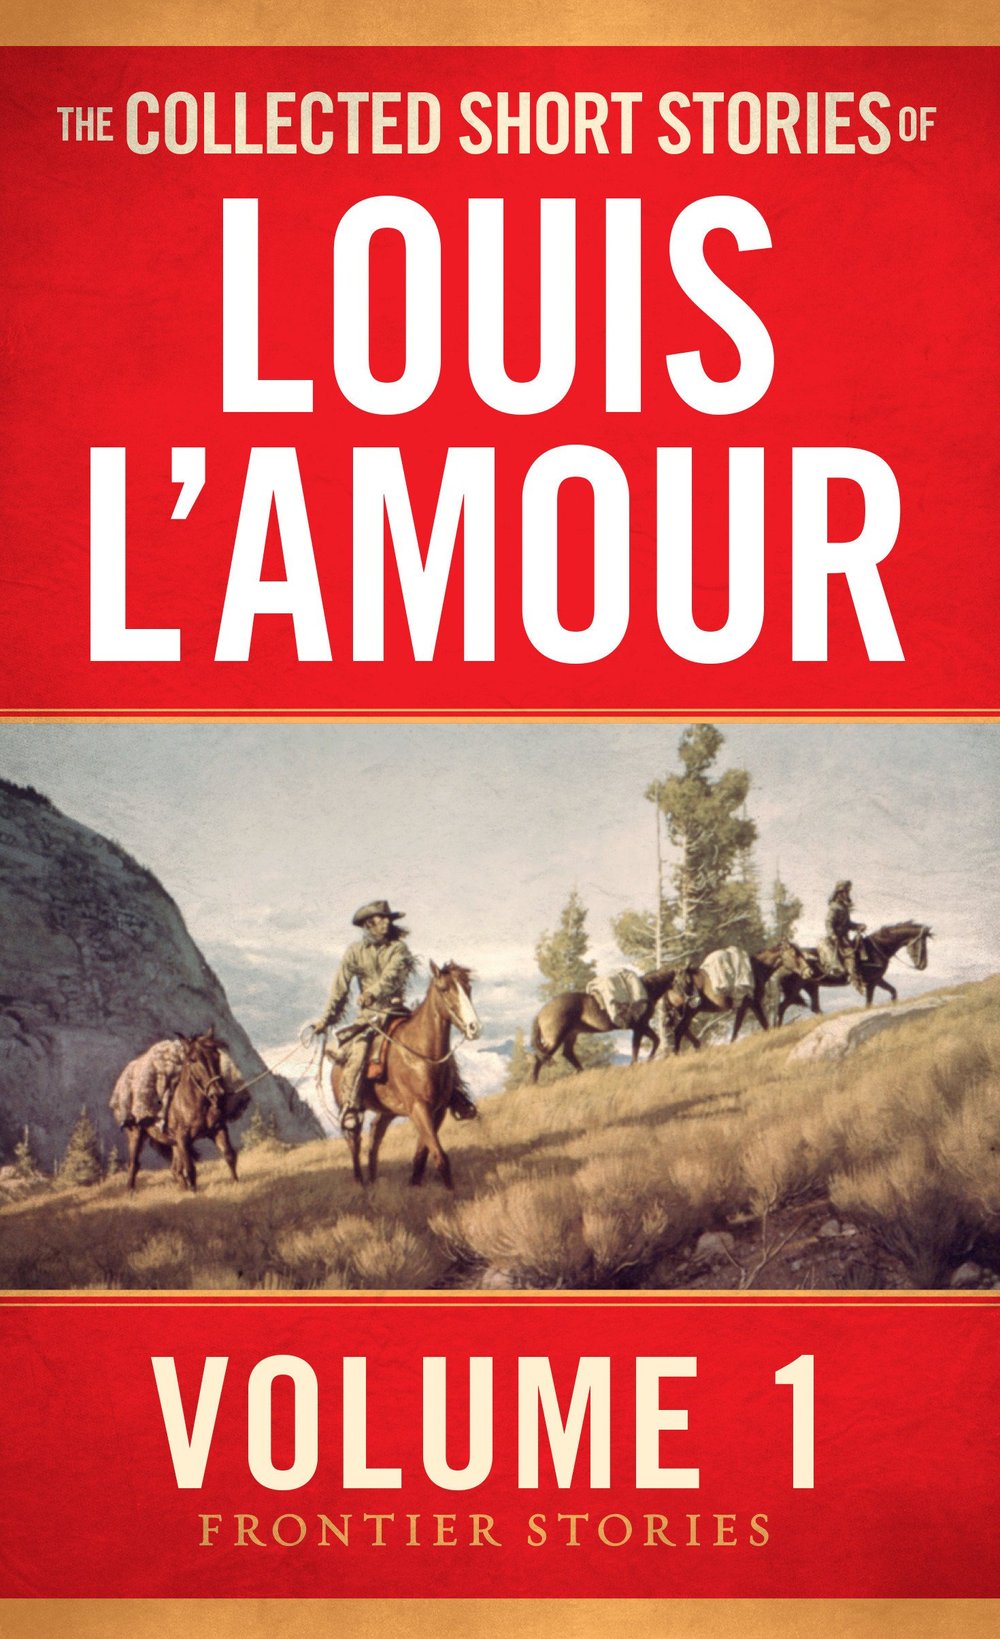 The Collected Short Stories of Louis L'Amour, Volume 4: The